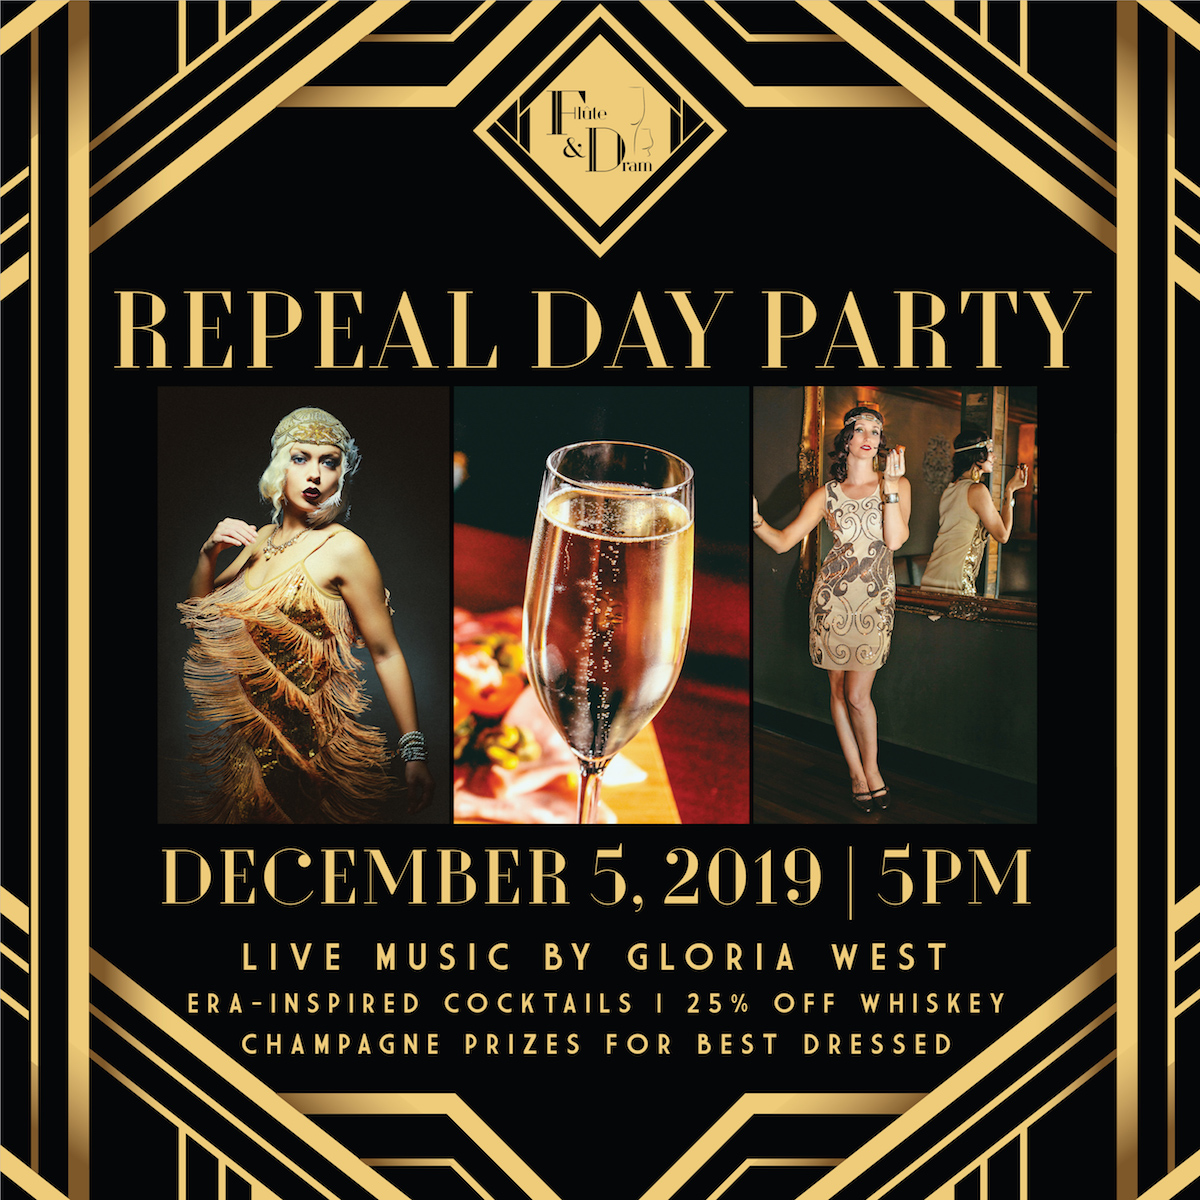 Break out the Fringe and Fedoras, Flute & Dram is Celebrating Repeal Day in Style